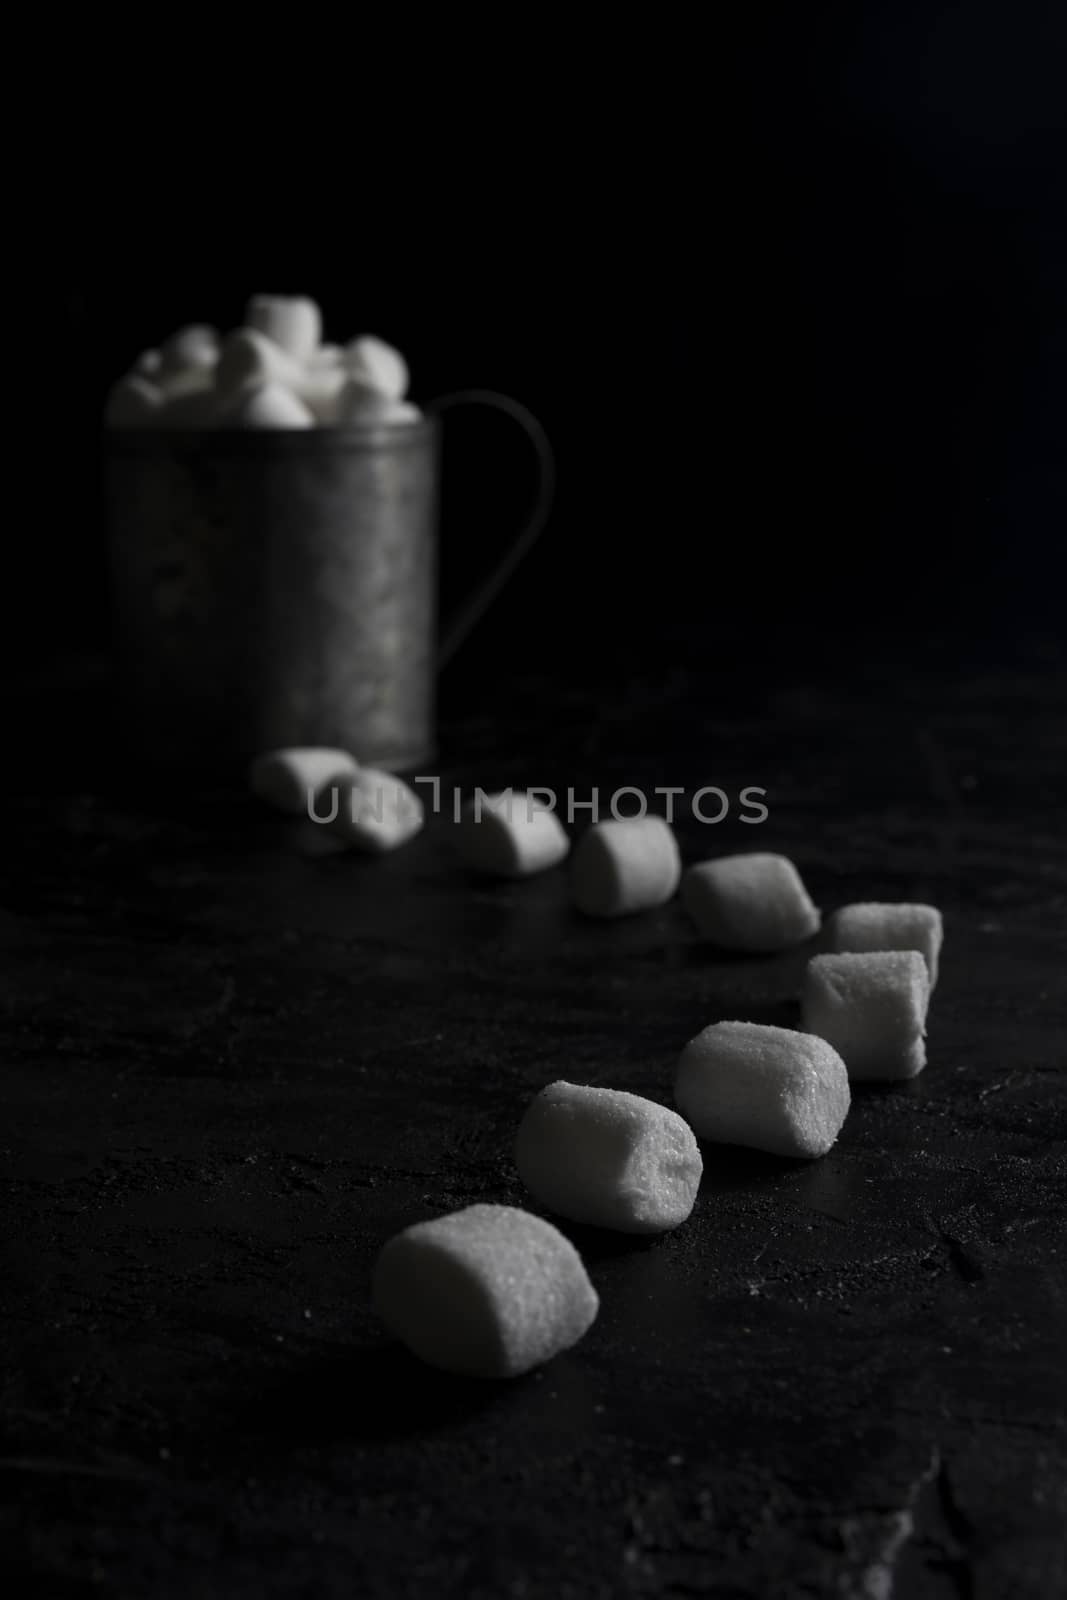 Cup of coffee and marshmallows on black background by sashokddt